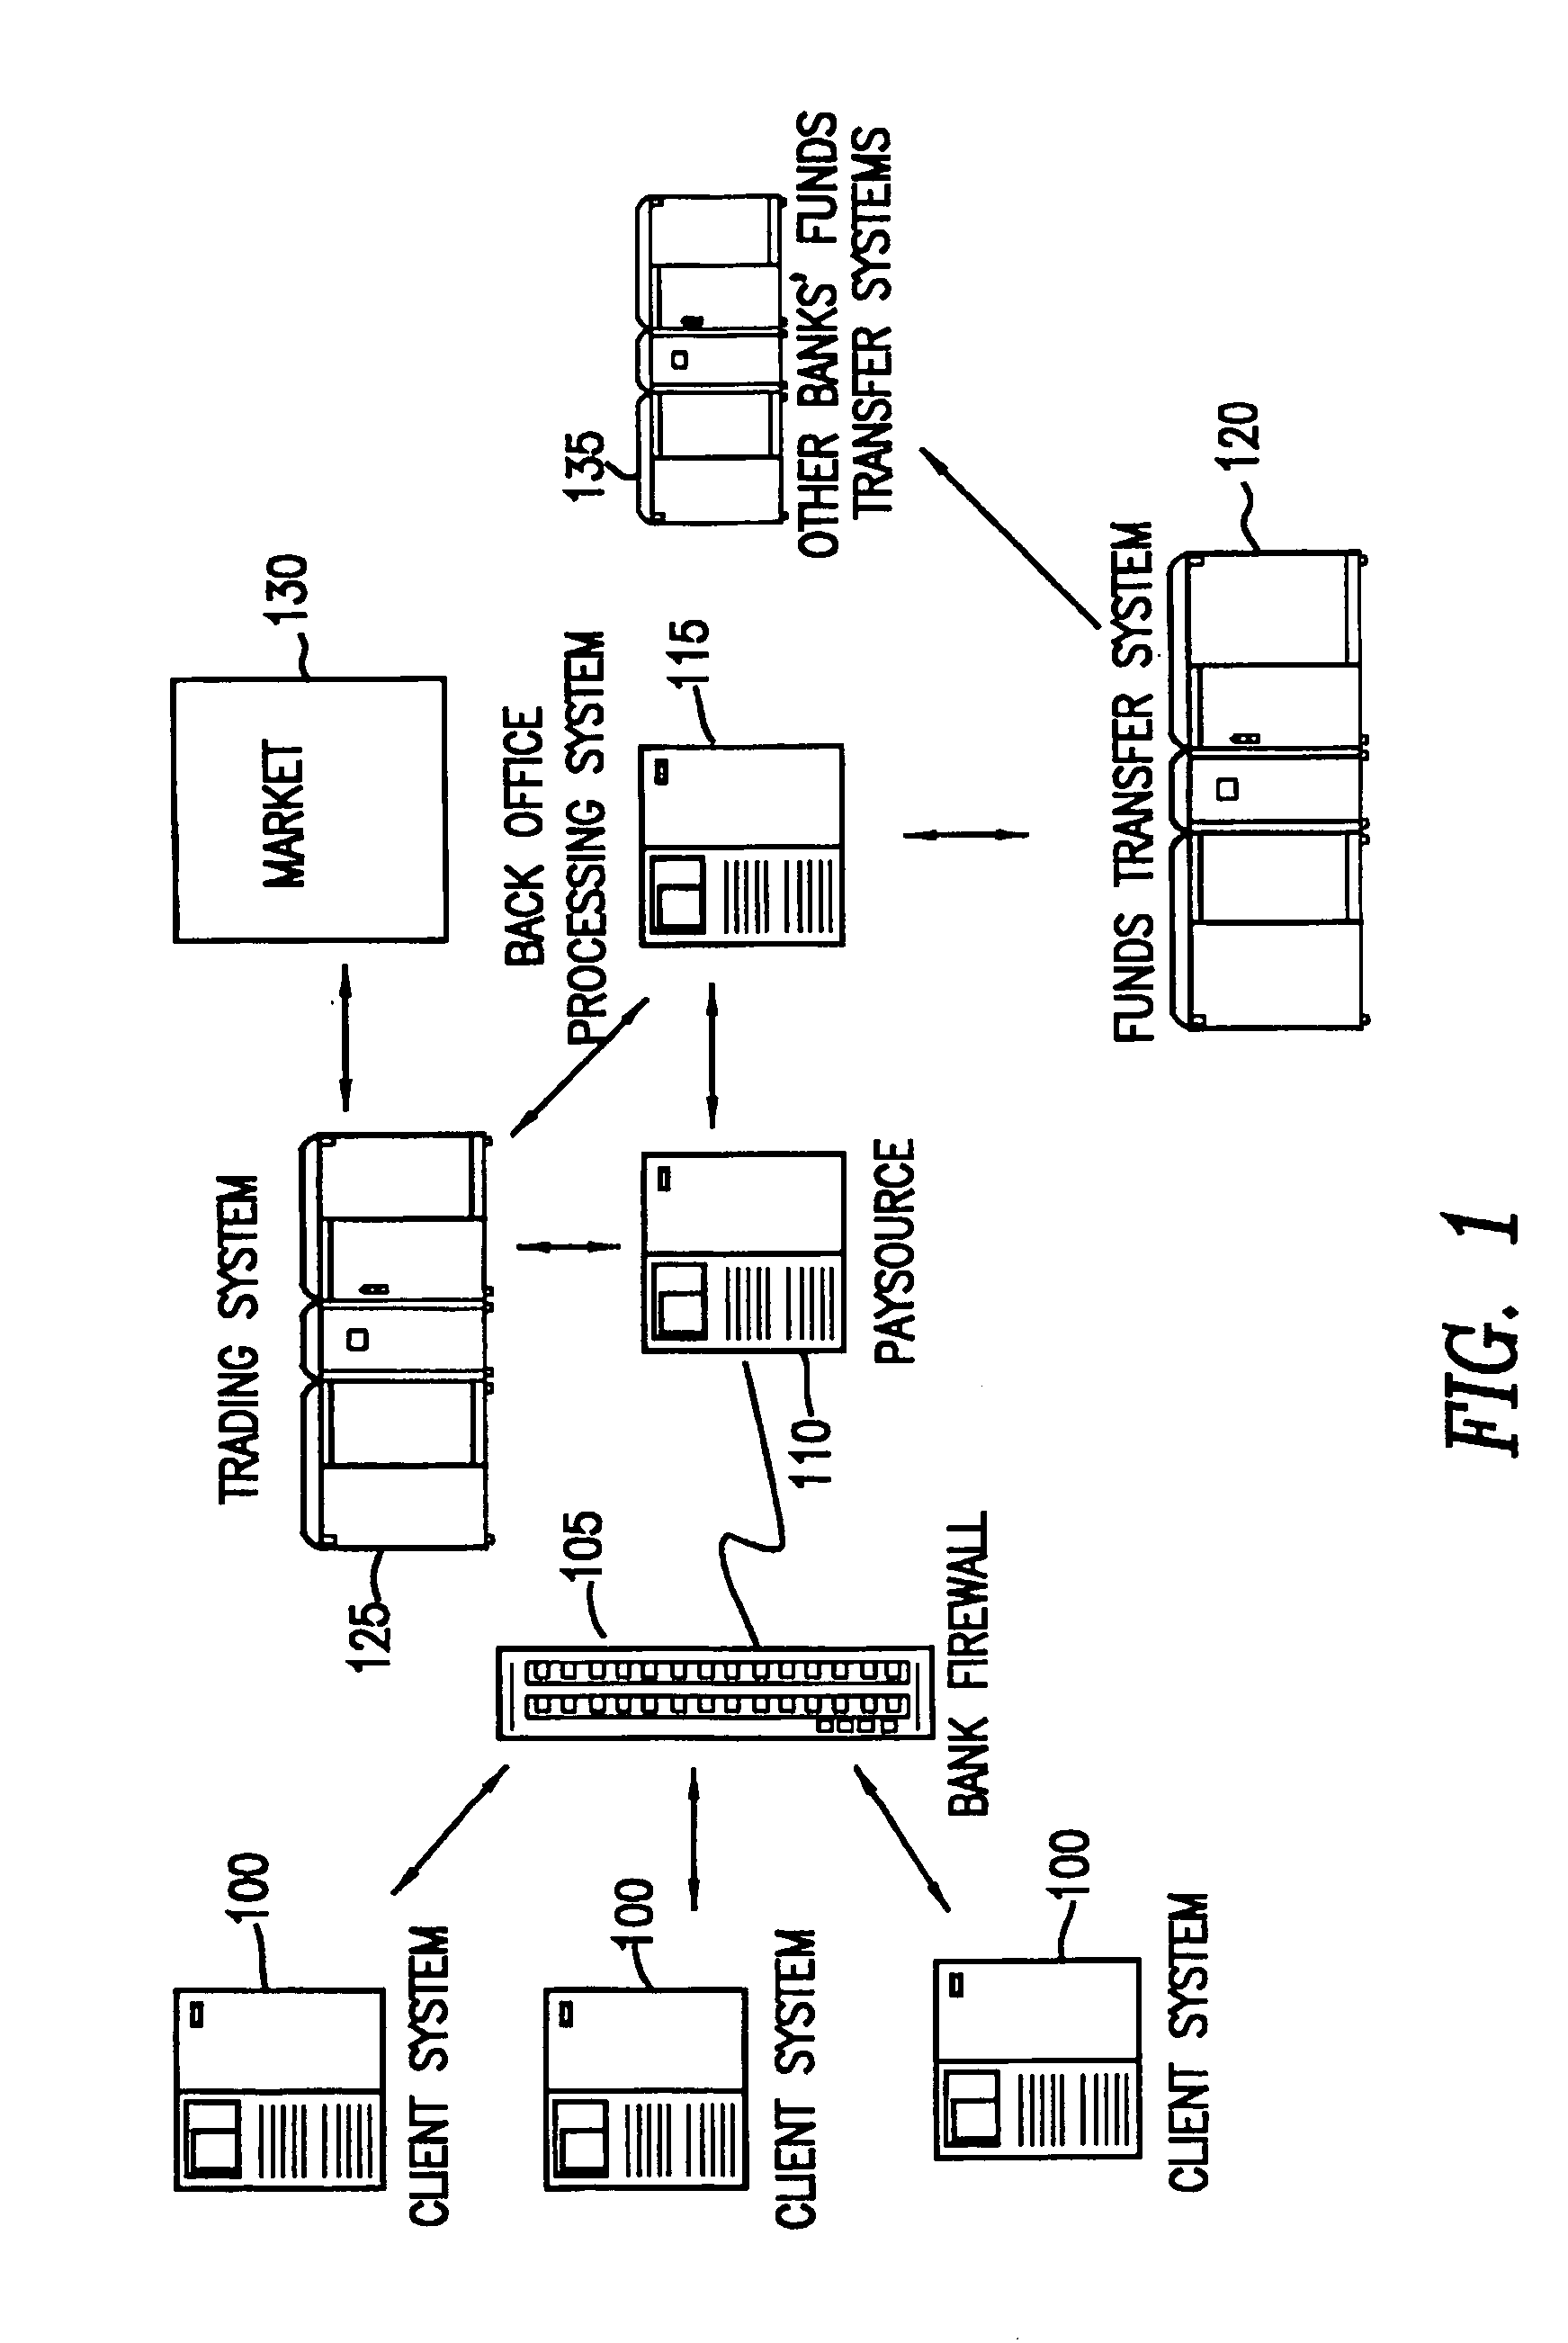 System and method for processing foreign currency payment instructions contained in bulk files